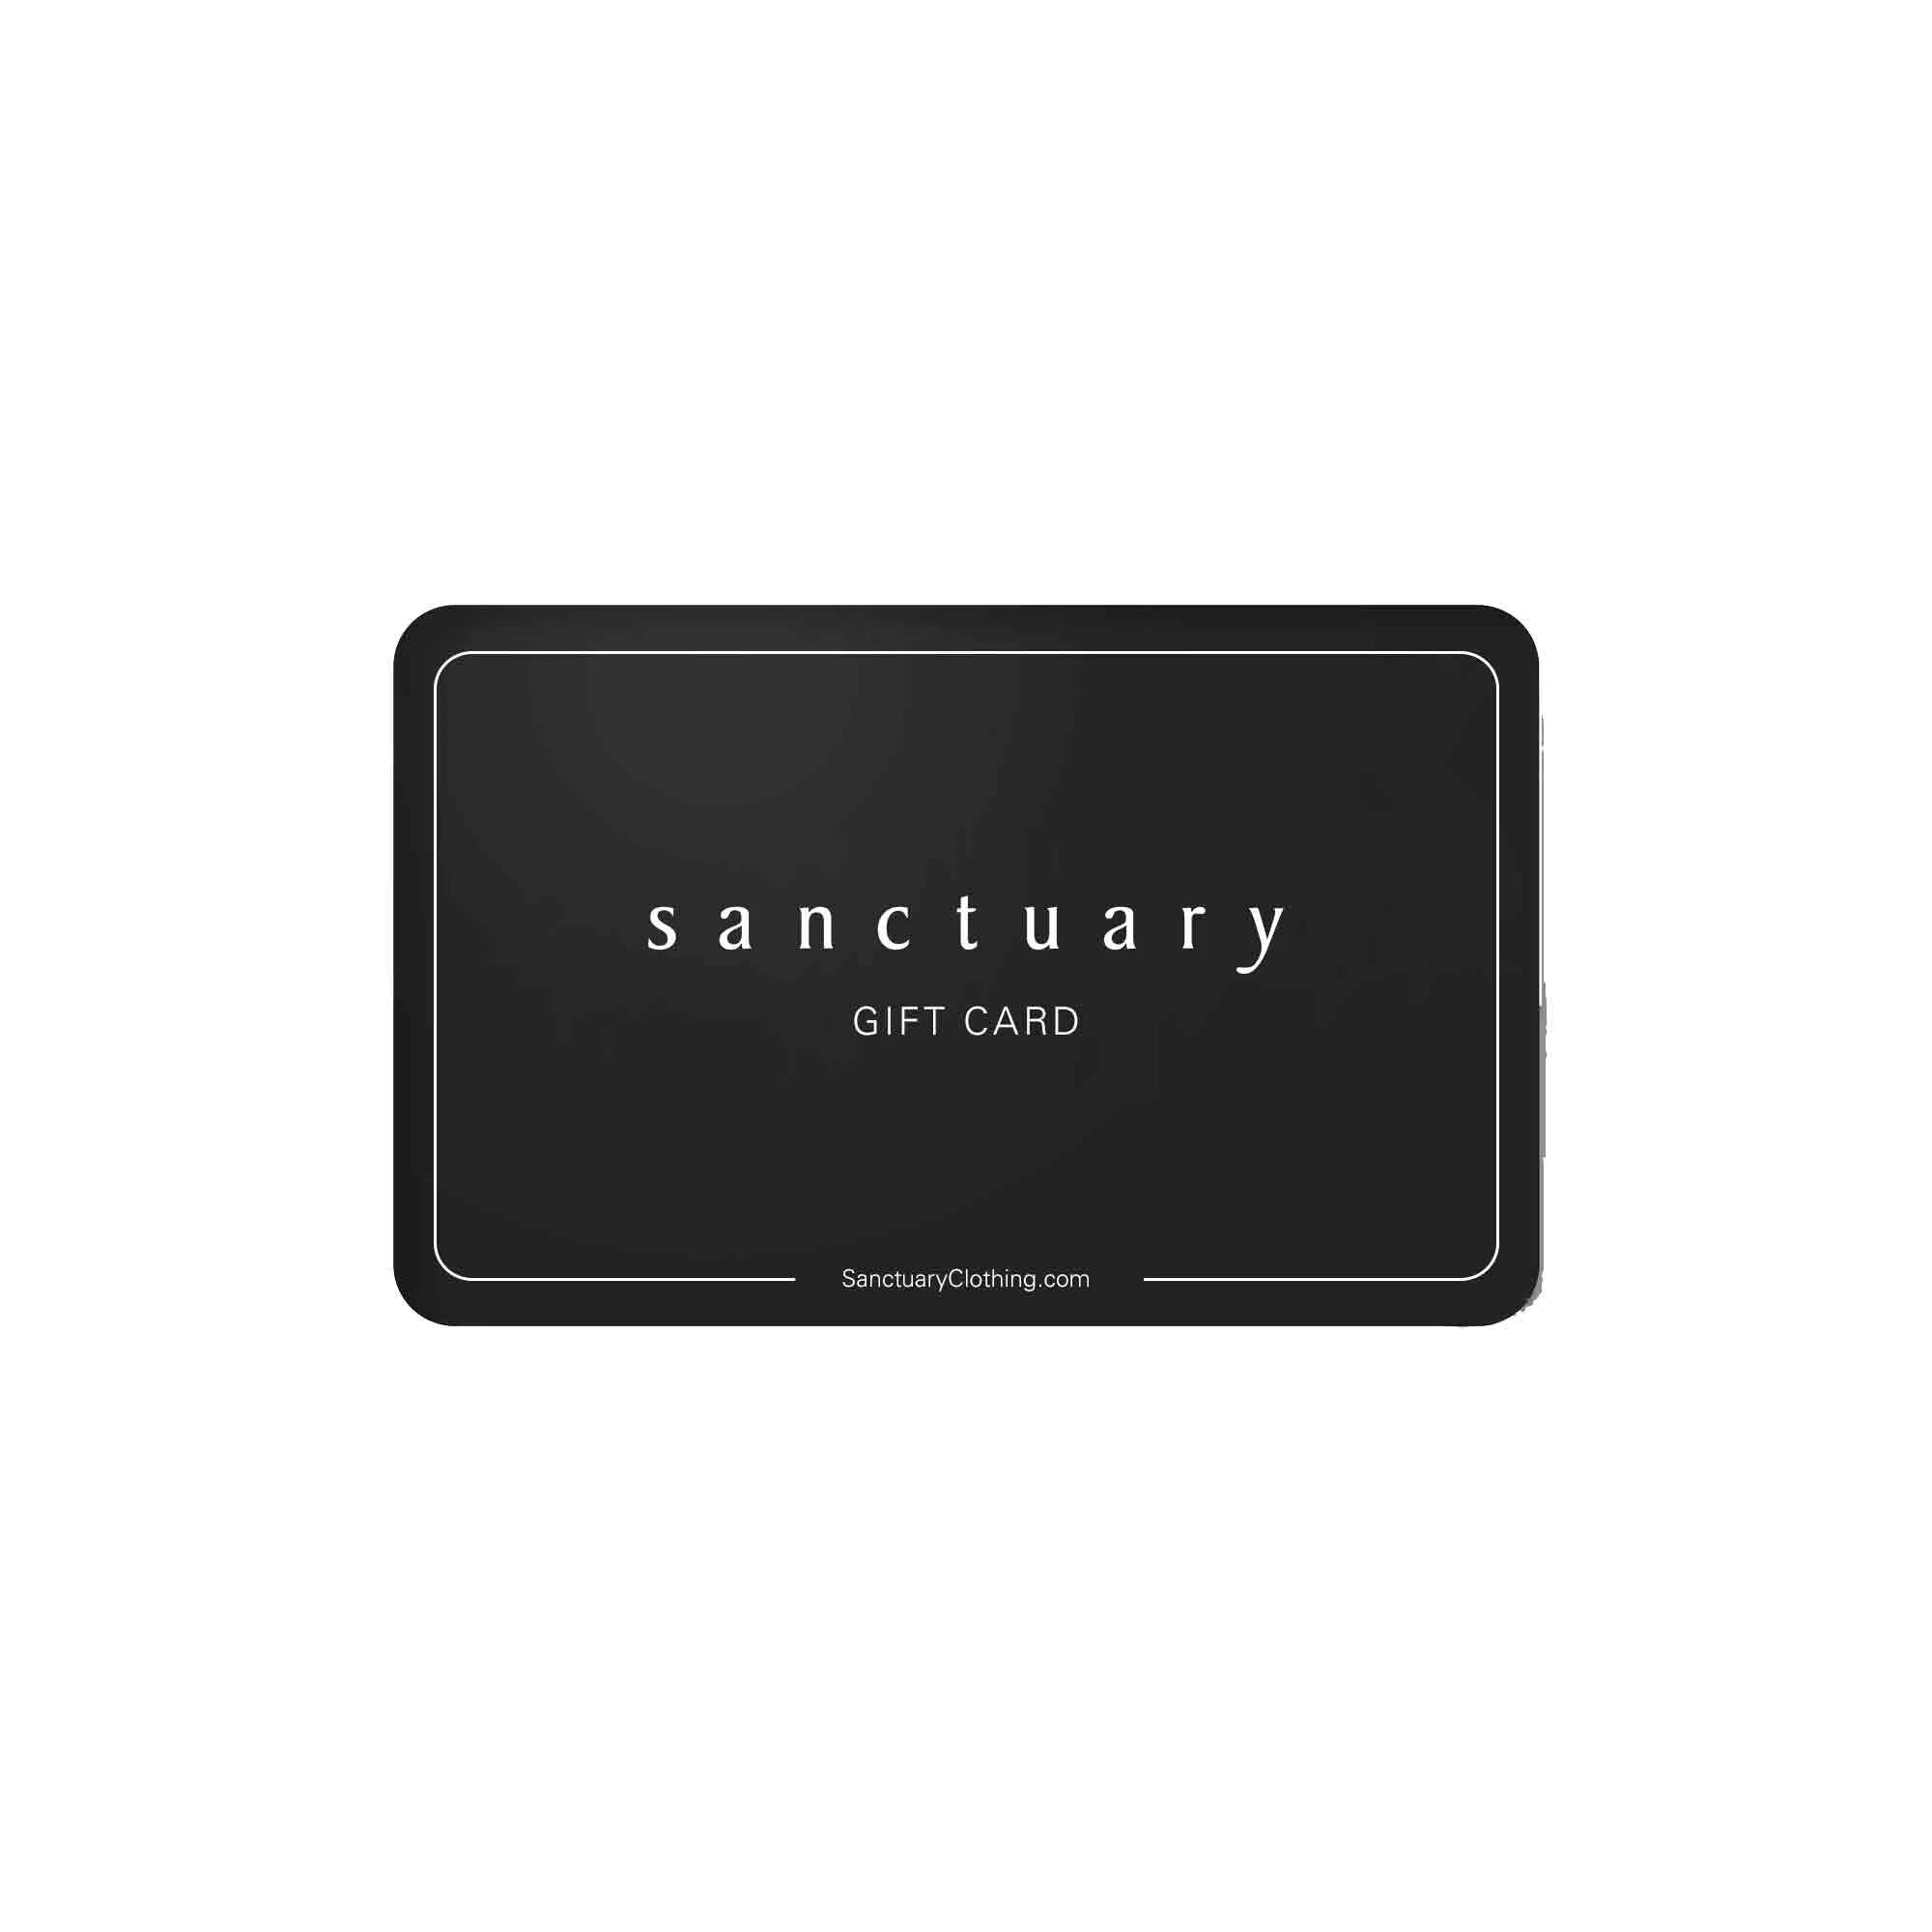 Sanctuary Clothing Gift Card $500.00 USD